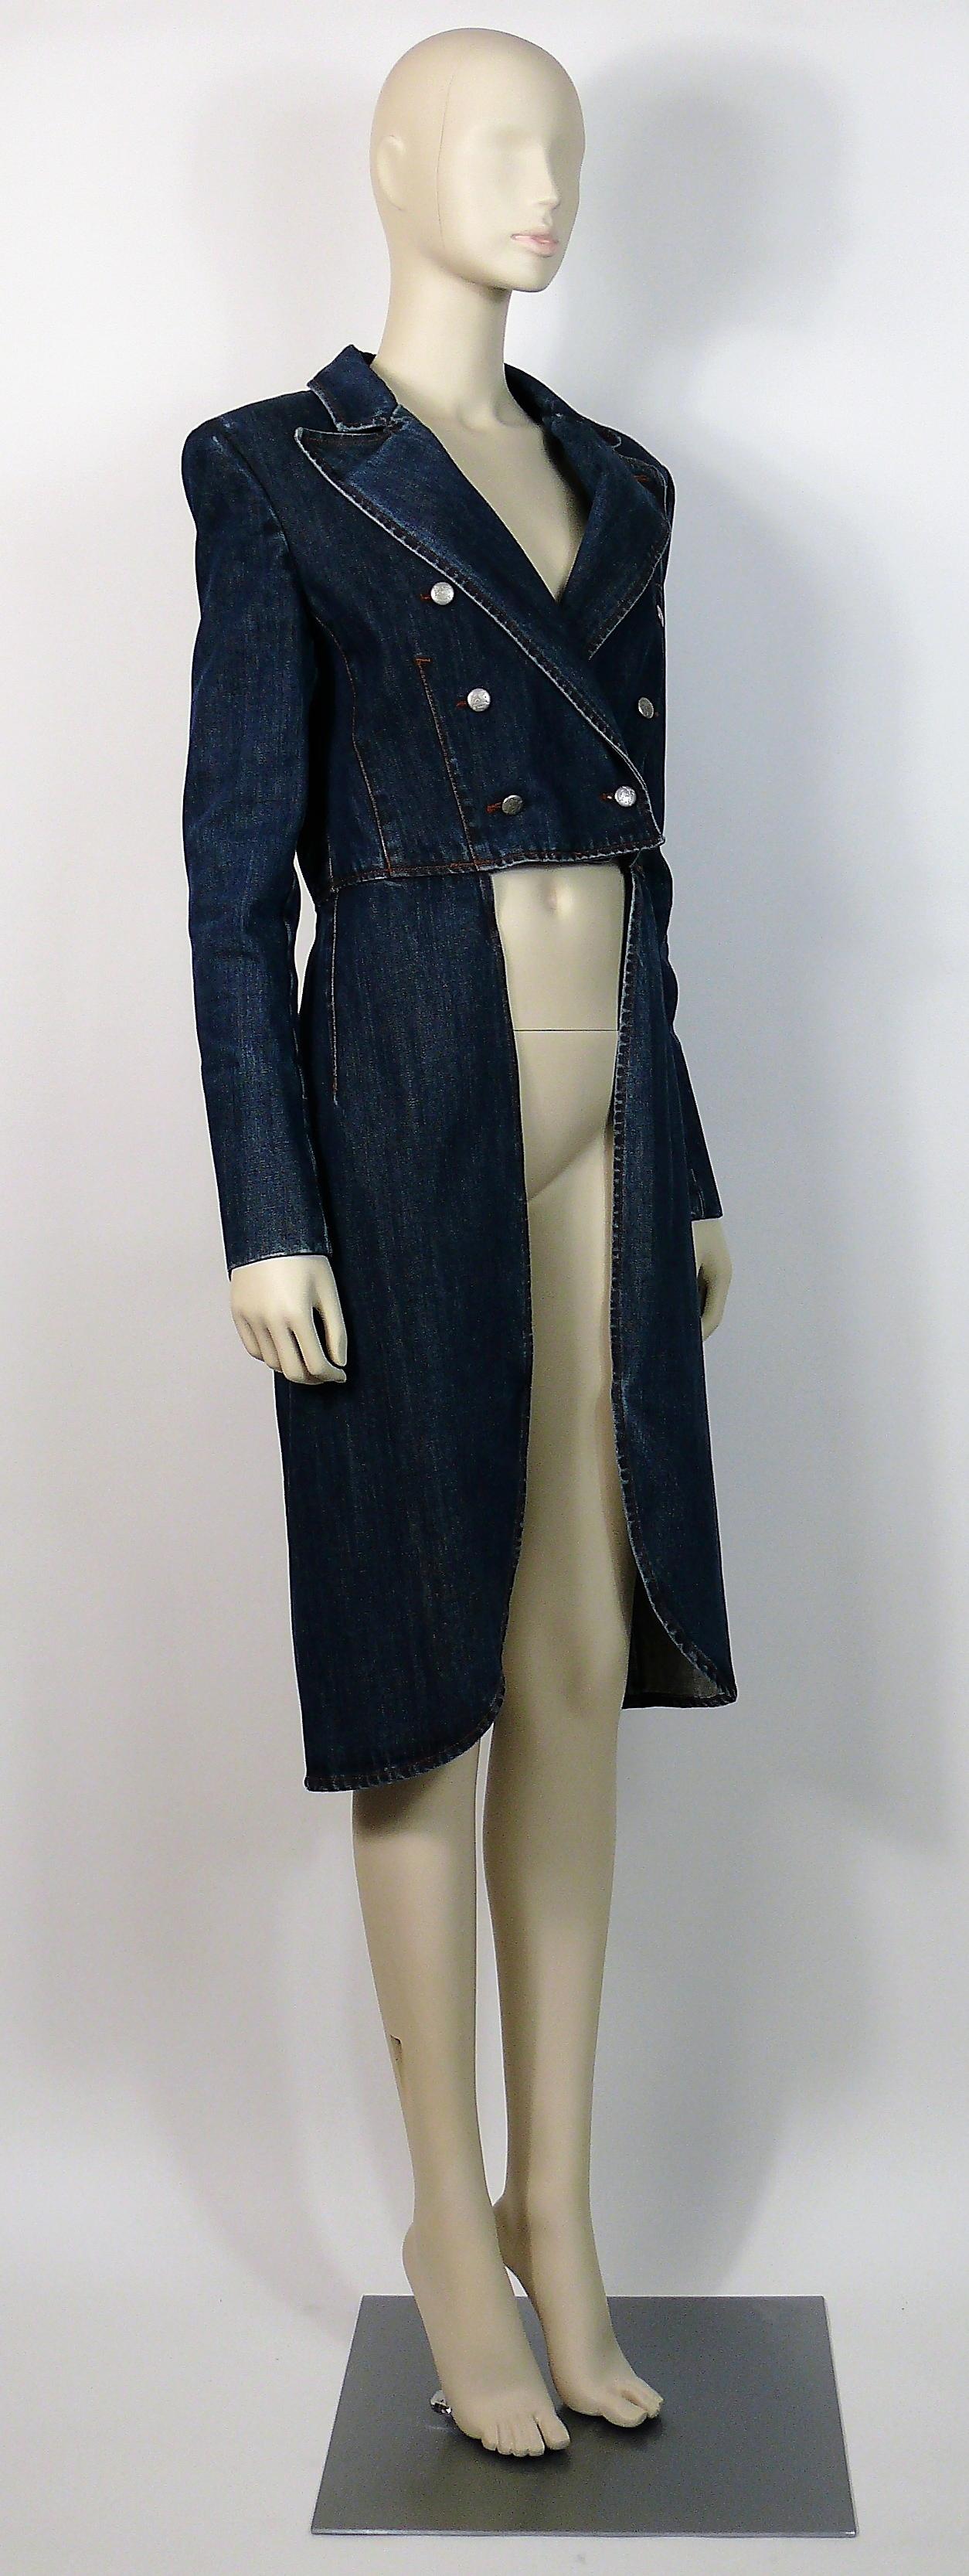 JEAN PAUL GAULTIER vintage rare denim tailcoat jacket.

This jacket features :
- Double breasted buttons at the front.
- Open front and wide collar.
- Exaggerated long tails at the back.
- Shoulder pads inside lining.

Label reads JPG JEAN'S.

Size